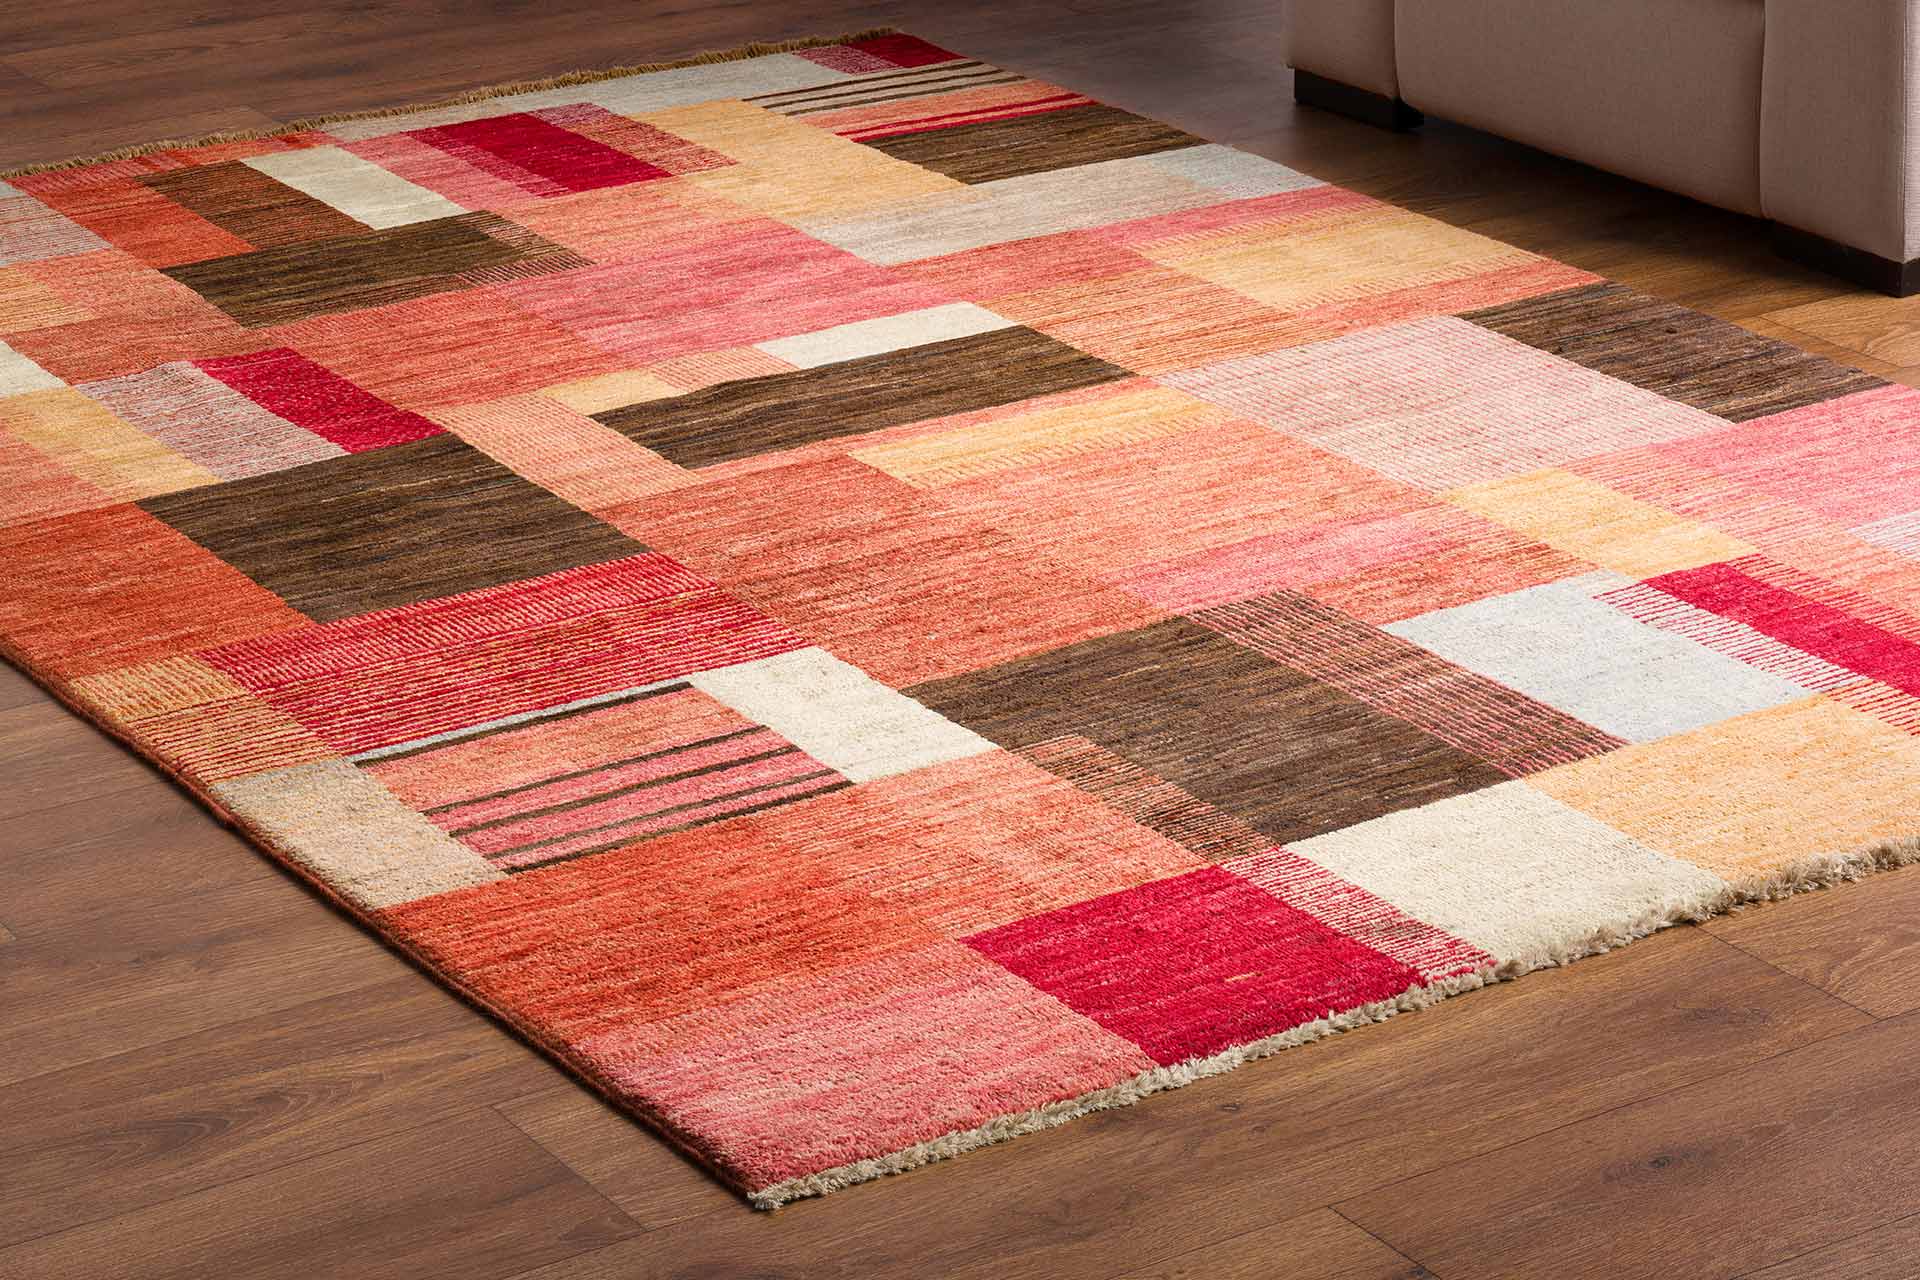 Rugs For Sale in Saddleworth | Buy Rugs Online | Lifestyle Carpets